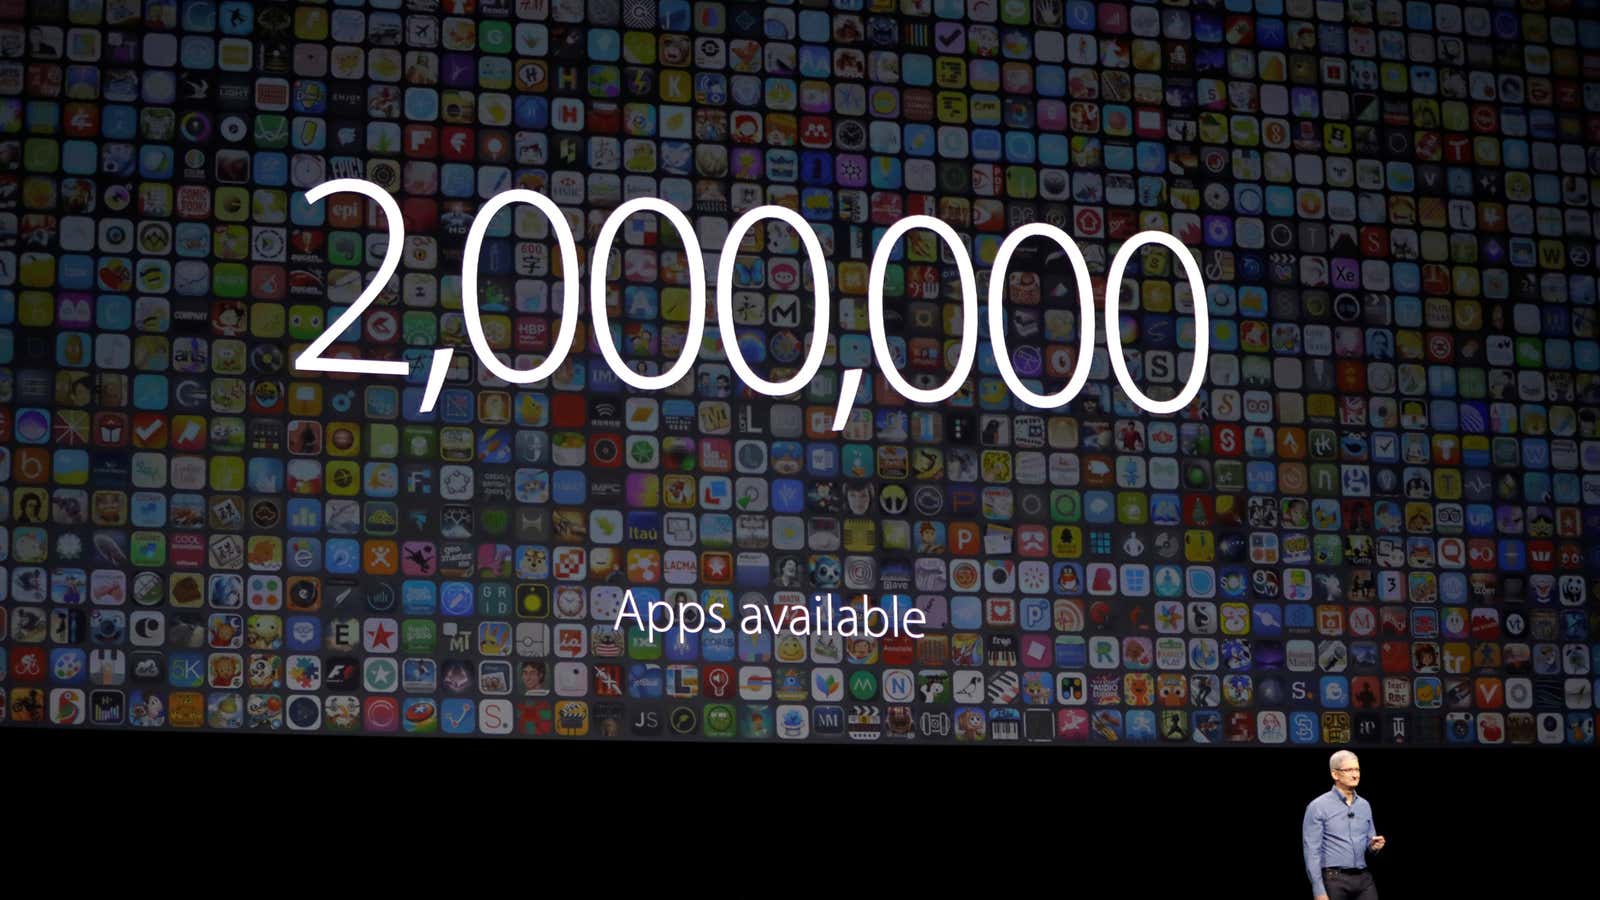 So many apps, so little time.